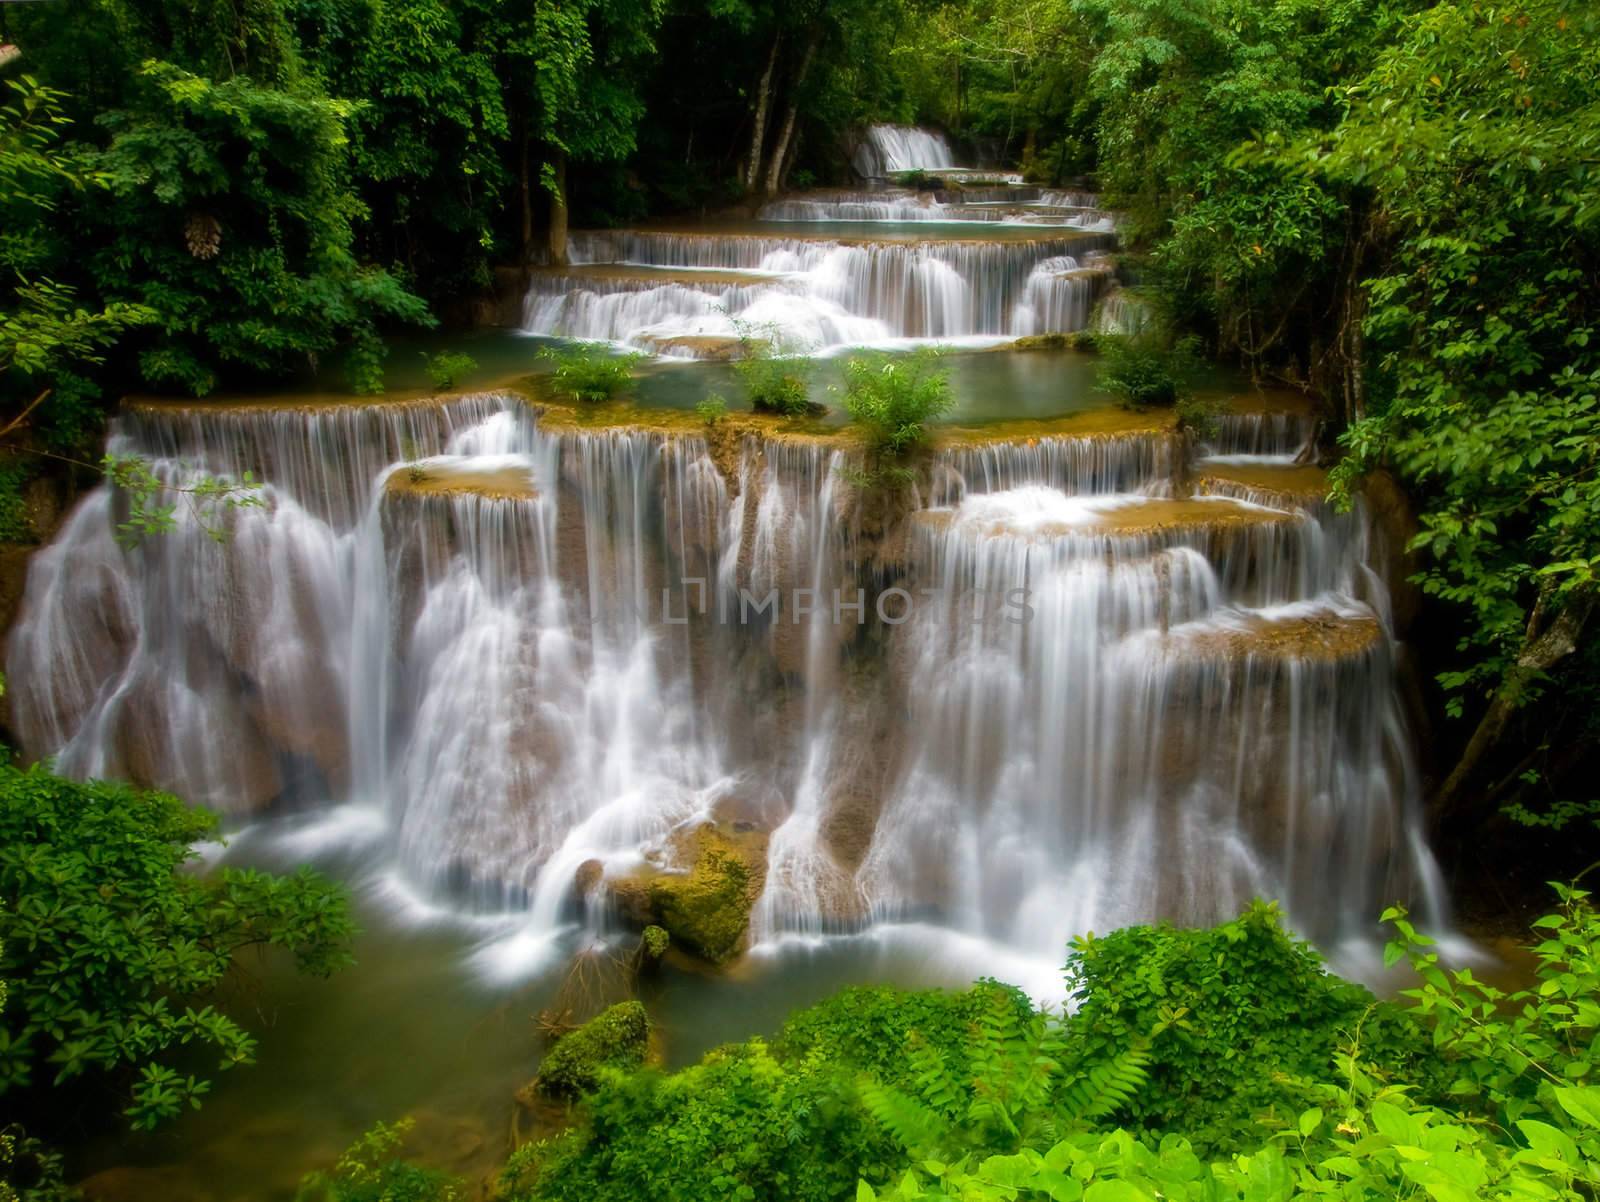 Huay Mae Khamin-Paradise Waterfall located in deep forest of Thailand